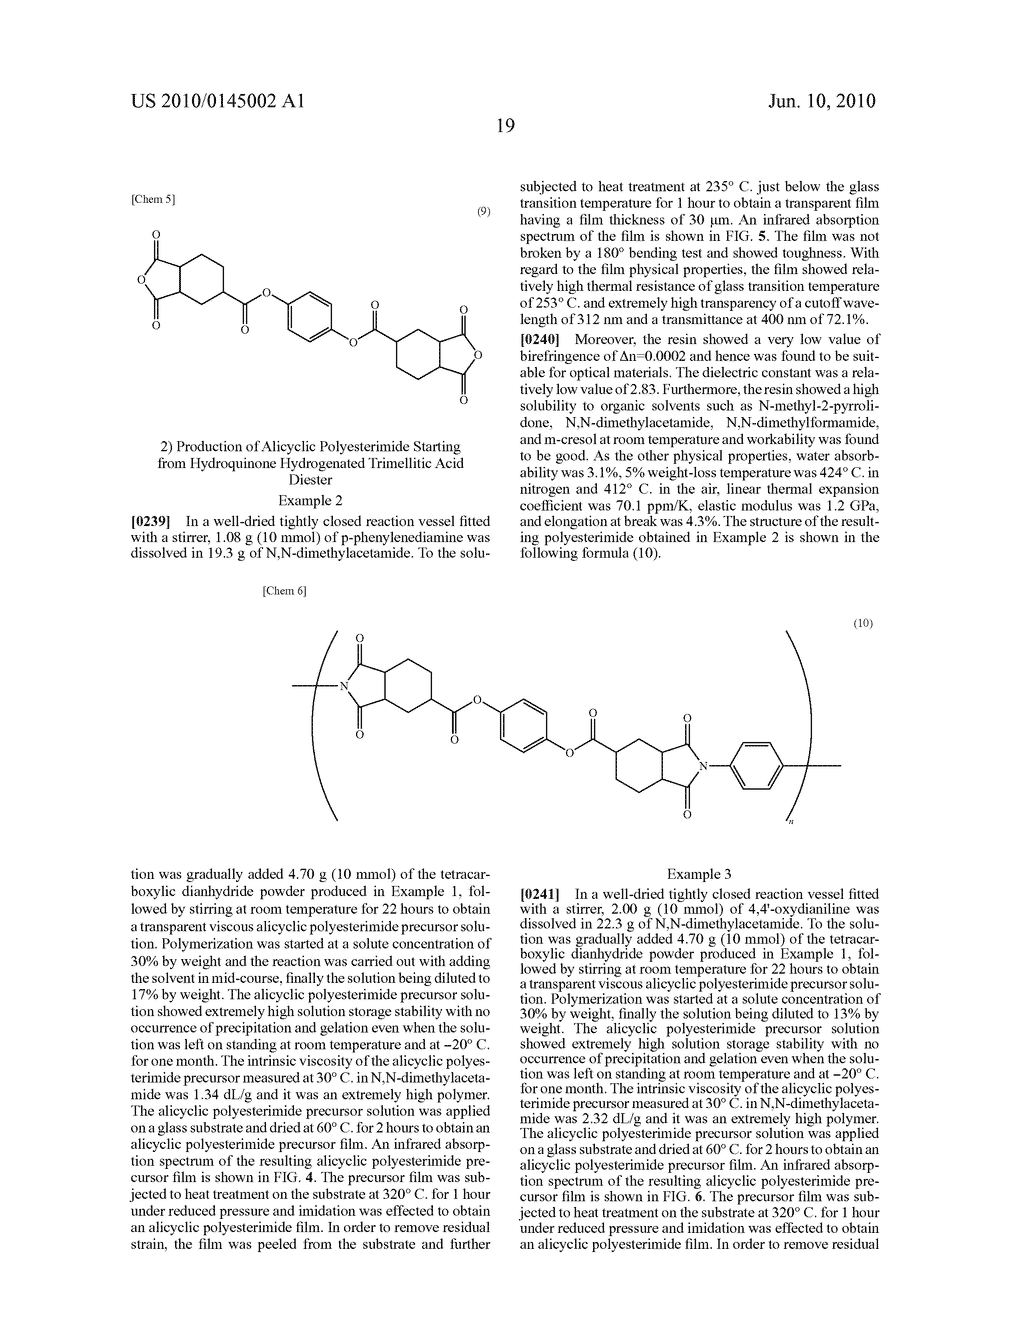 TETRACARBOXYLIC ACID OR POLYESTERIMIDE THEREOF, AND PROCESS FOR PRODUCTION OF THE SAME - diagram, schematic, and image 41